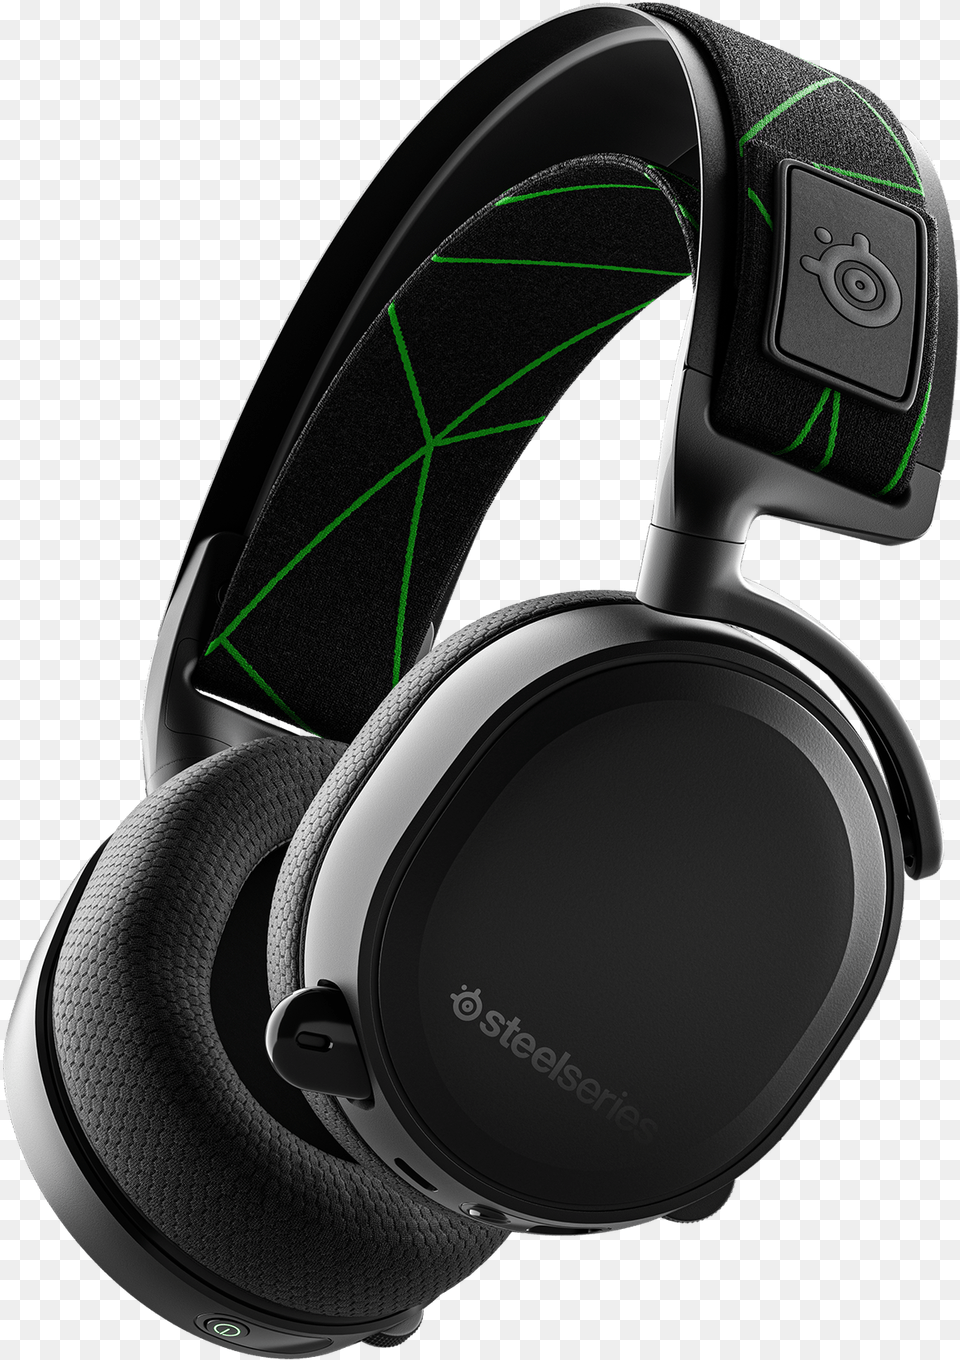 Arctis 7x Wireless Gaming Headset For Steelseries Arctis 7x Wireless, Electronics, Headphones Free Png Download